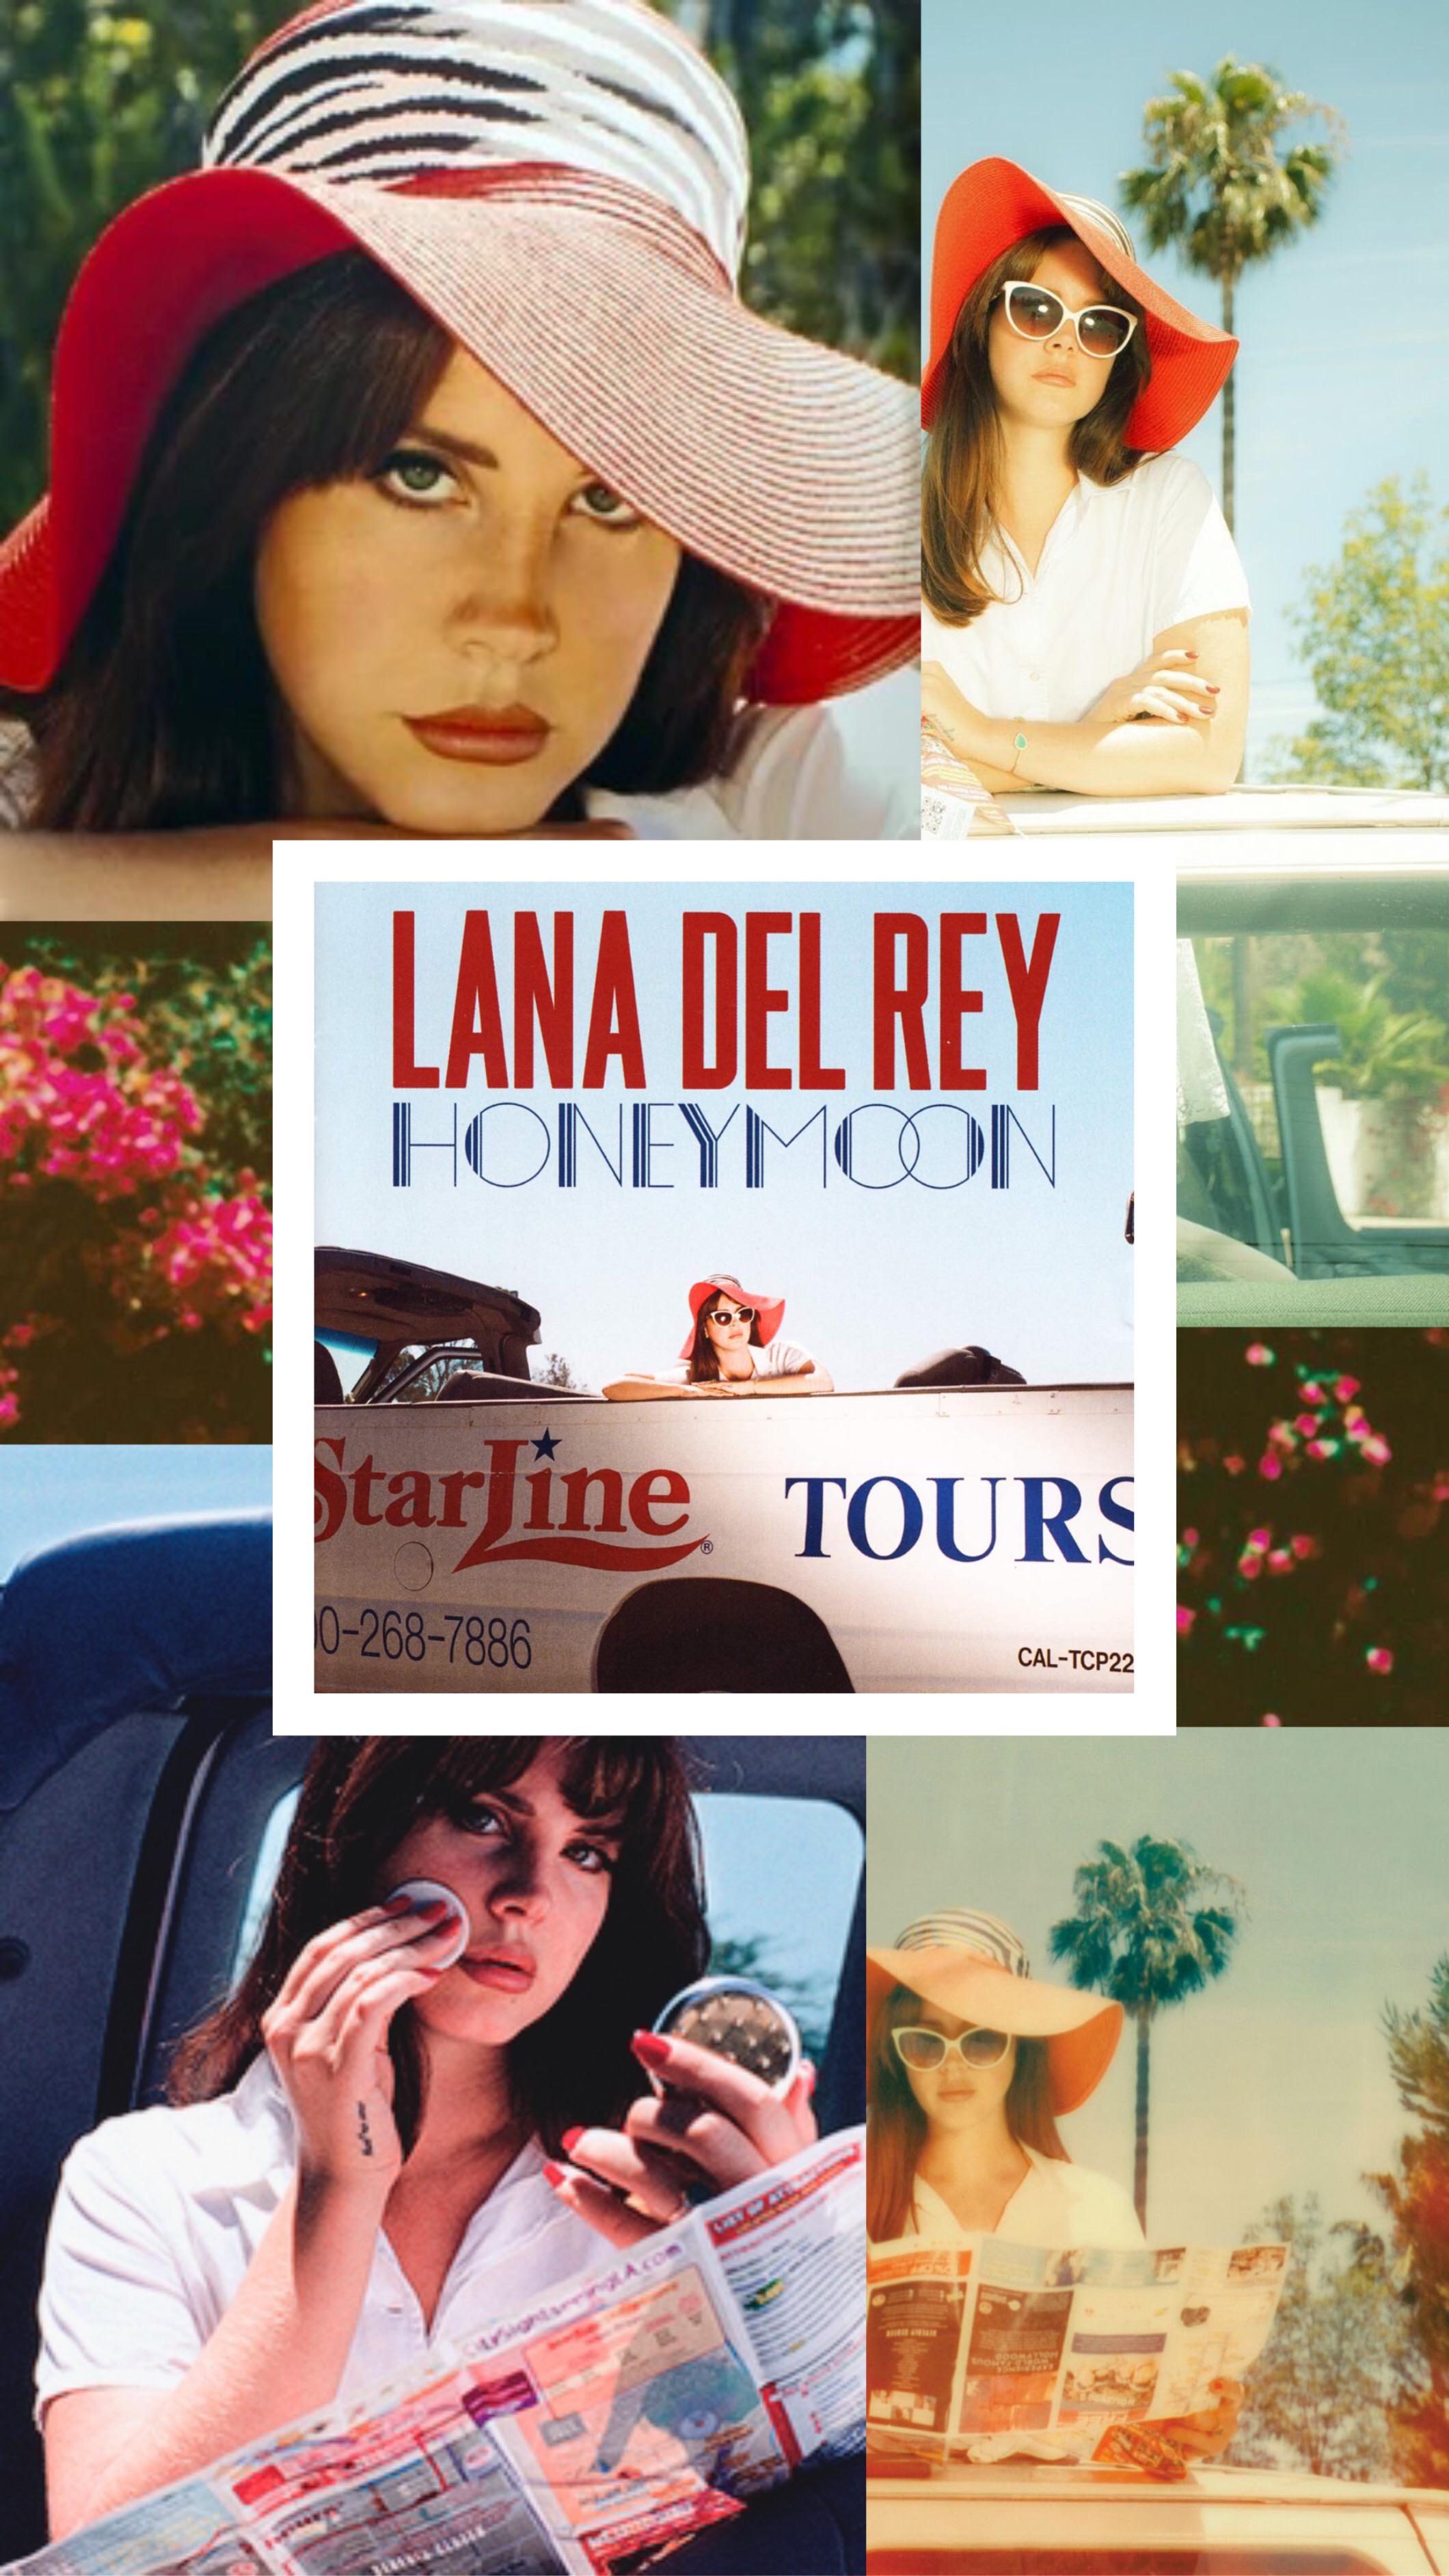 Hey Guys, I Made A Wallpaper Collage For My Favorite LDR Album, Honeymoon. You Can Use It If You Want!